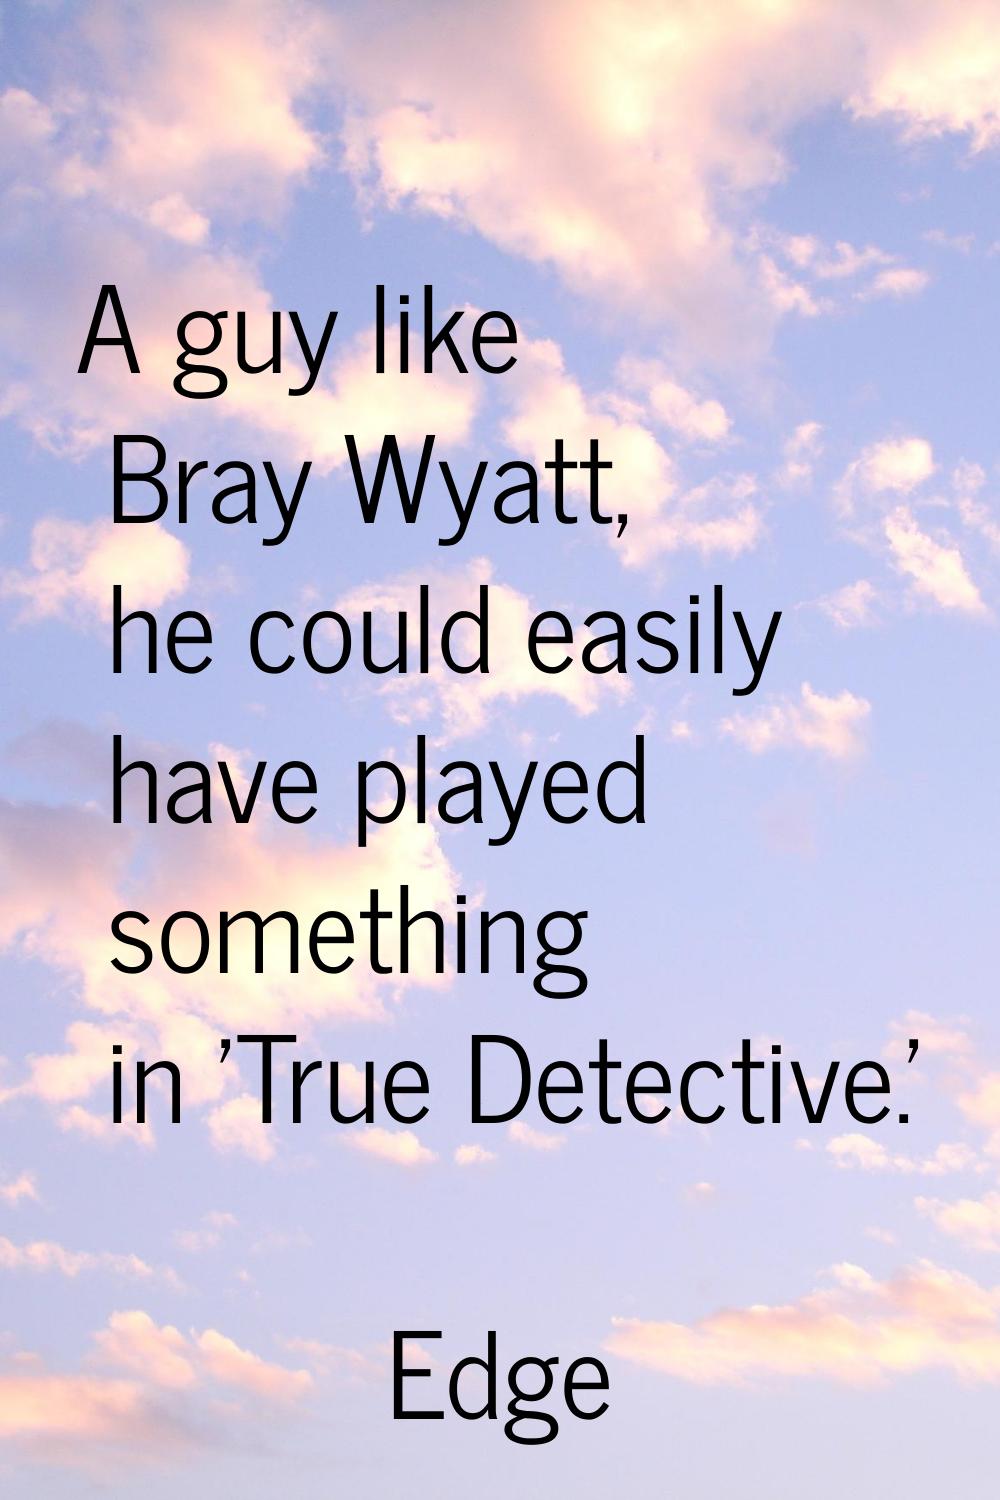 A guy like Bray Wyatt, he could easily have played something in 'True Detective.'